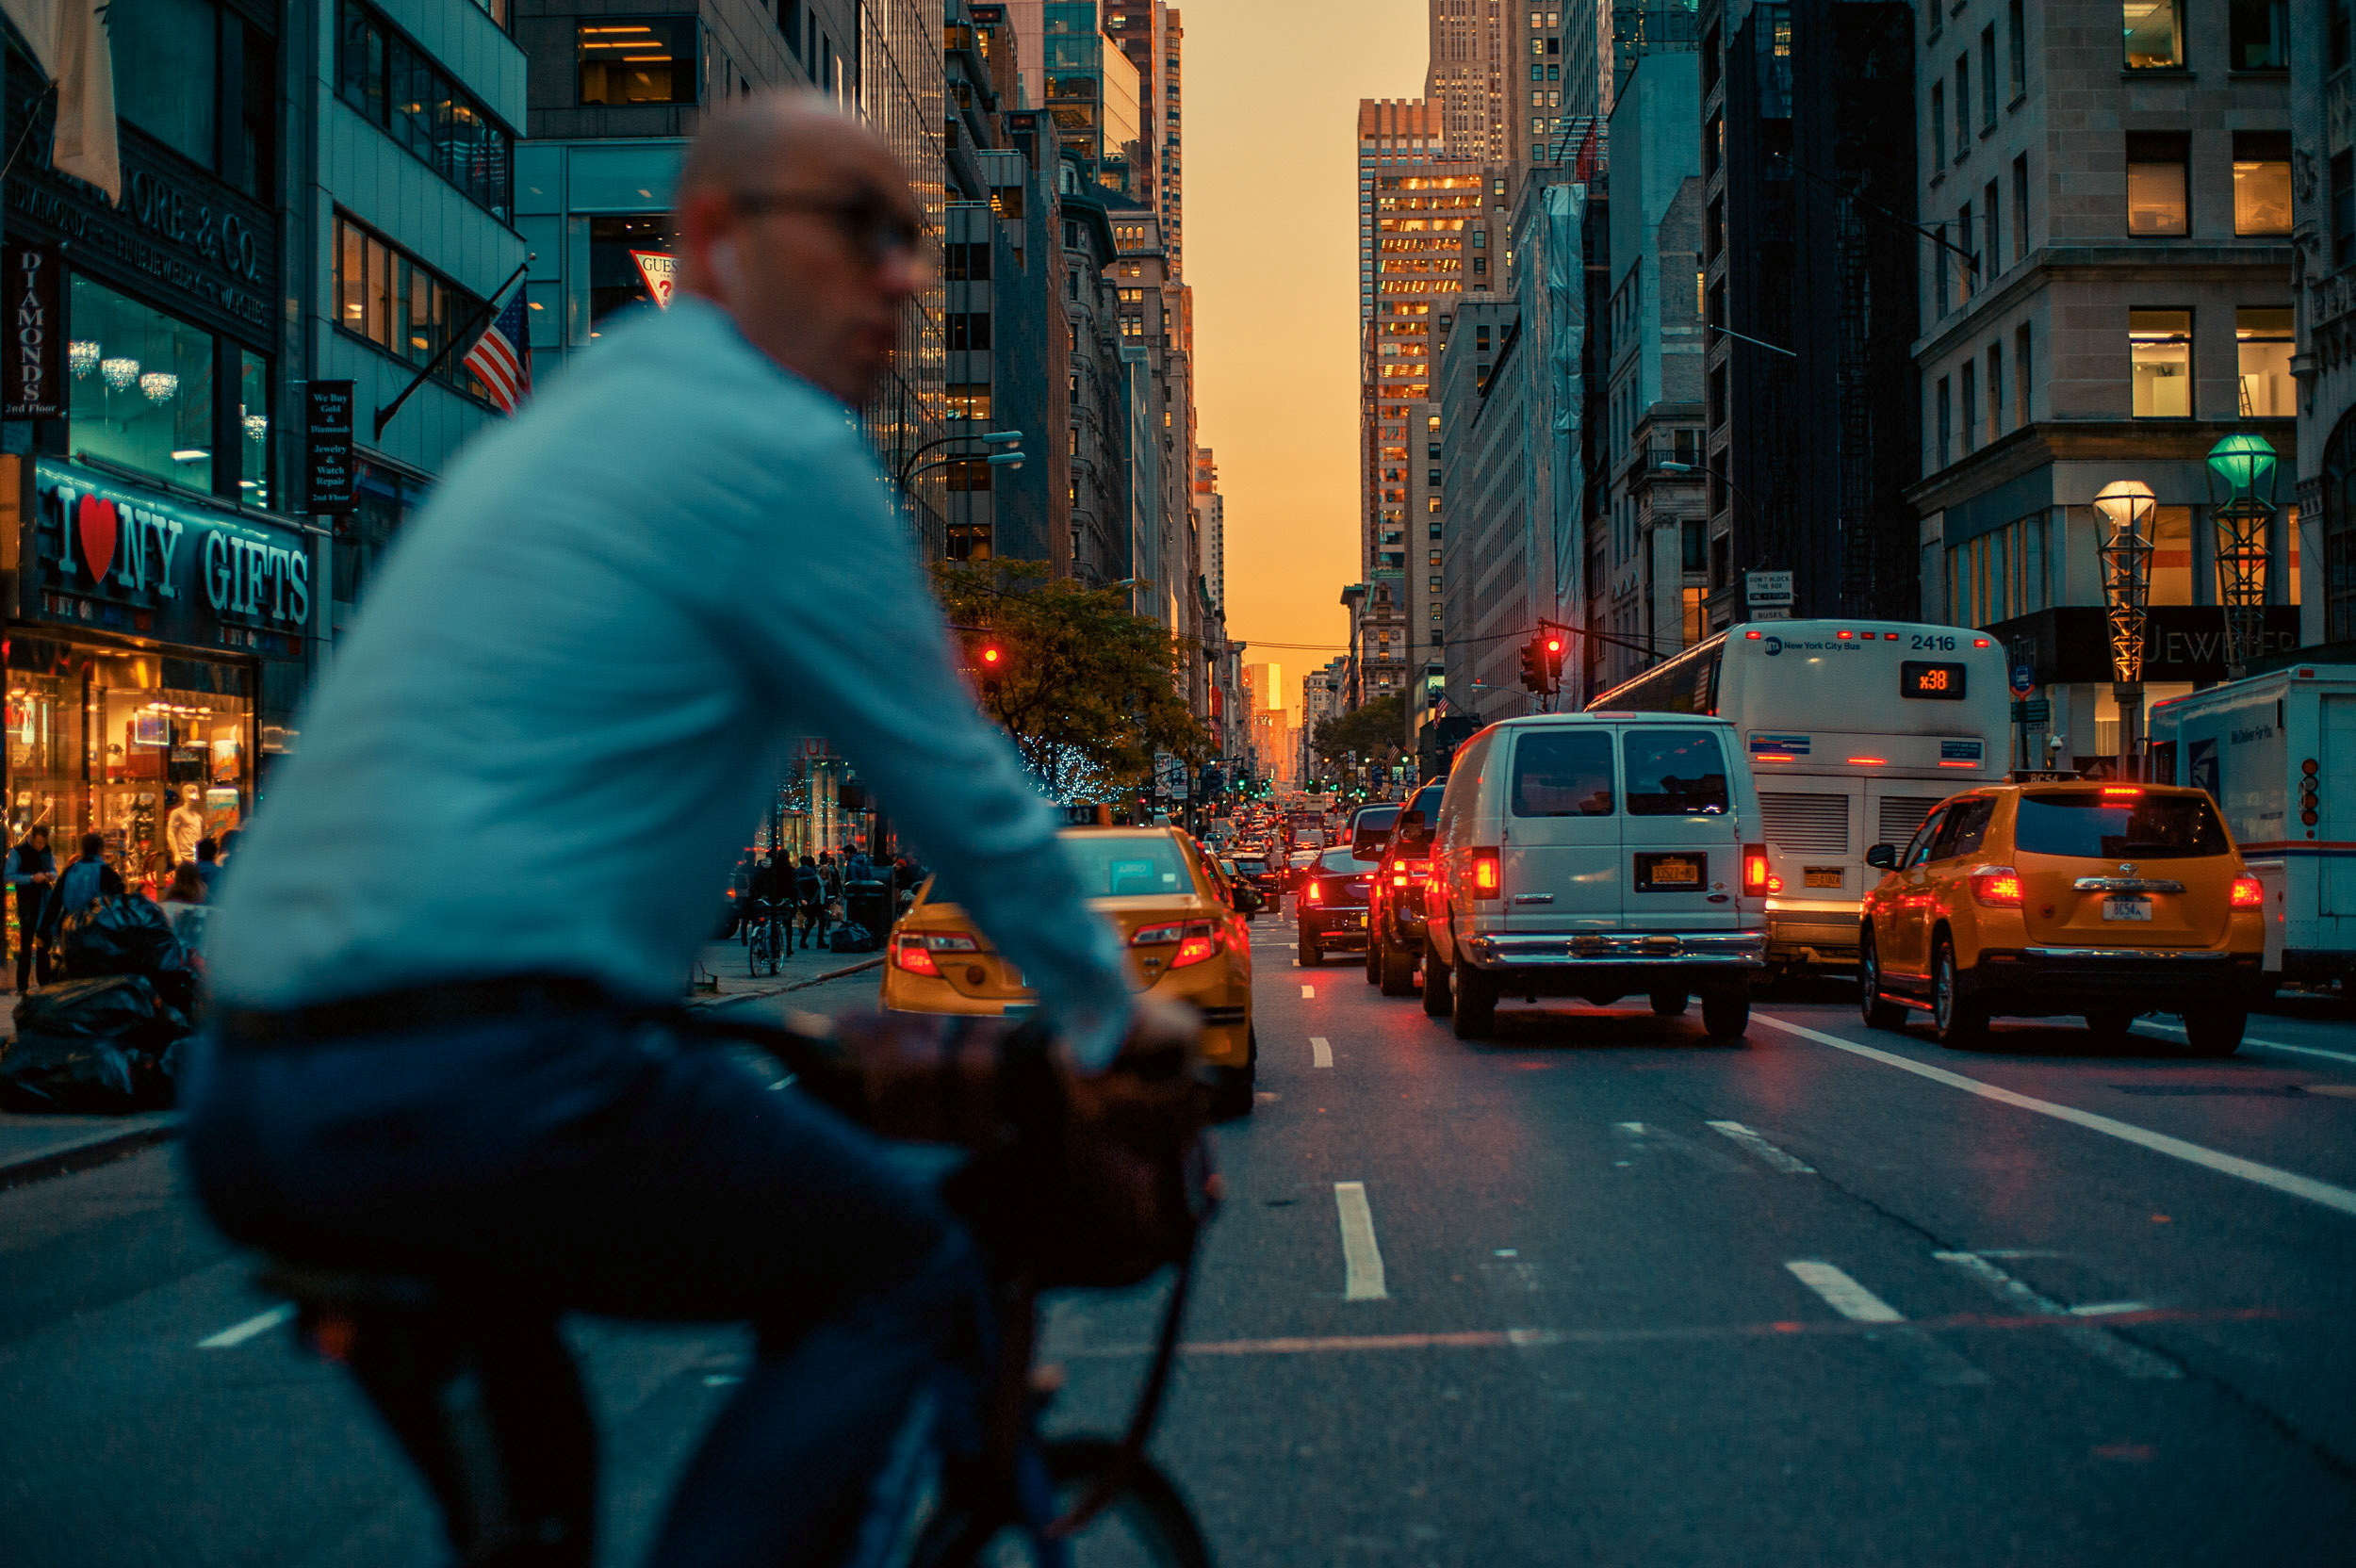 A MAN RIDES HIS BIKE THROUGH MIDTOWN MANHATTAN IN FRONT OF A BEAUTIFUL SUNSET